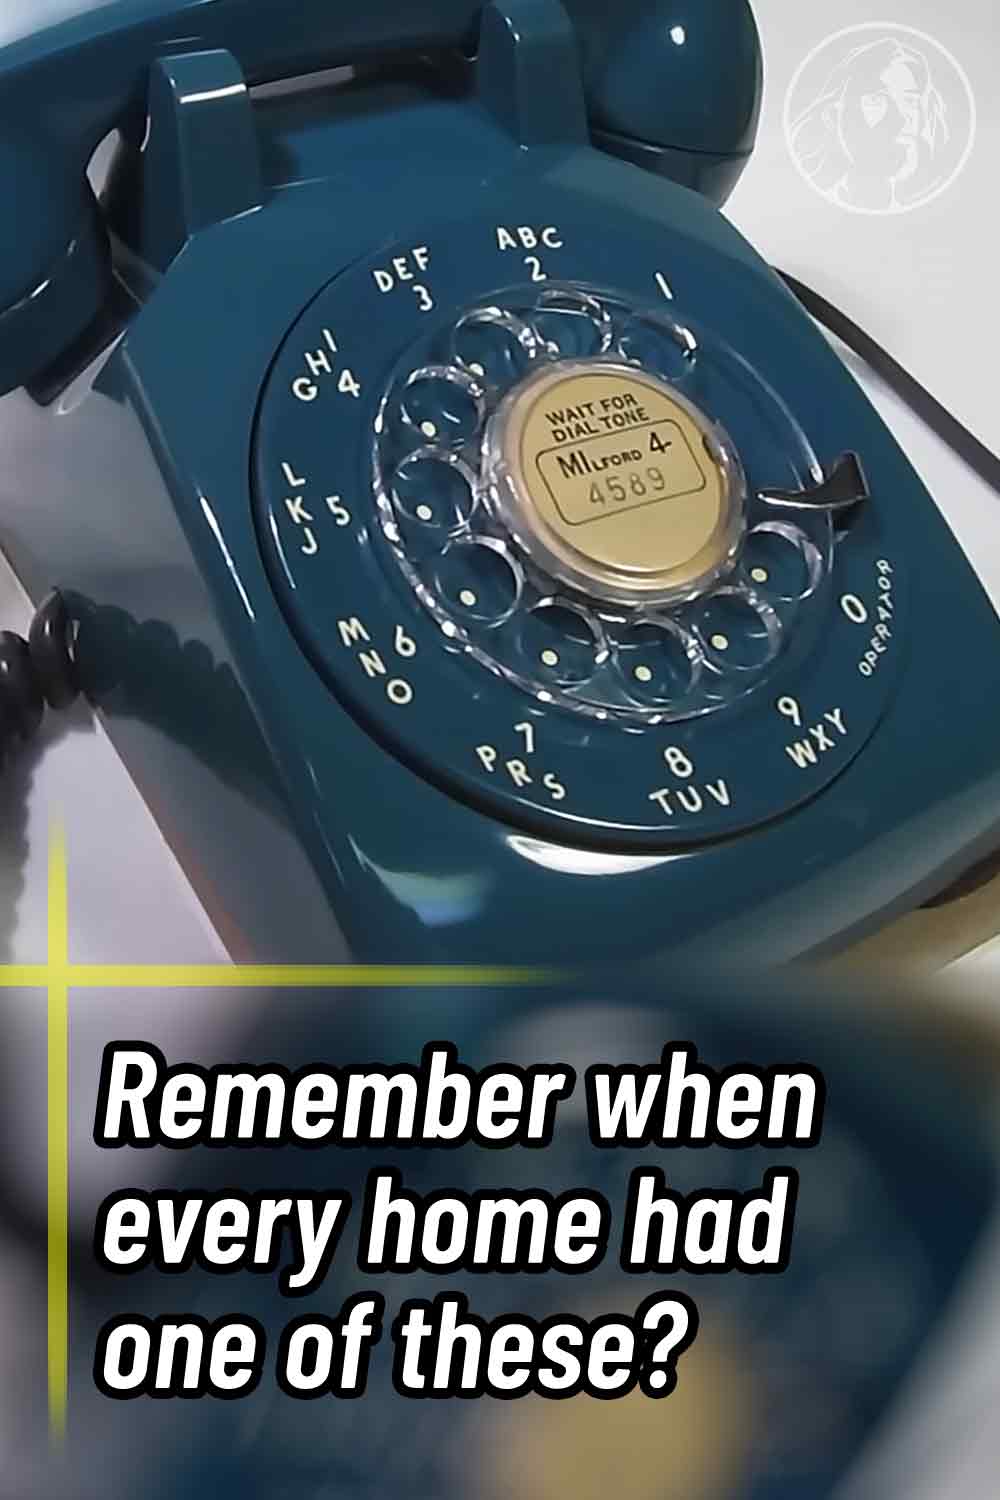 Remember when every home had one of these?